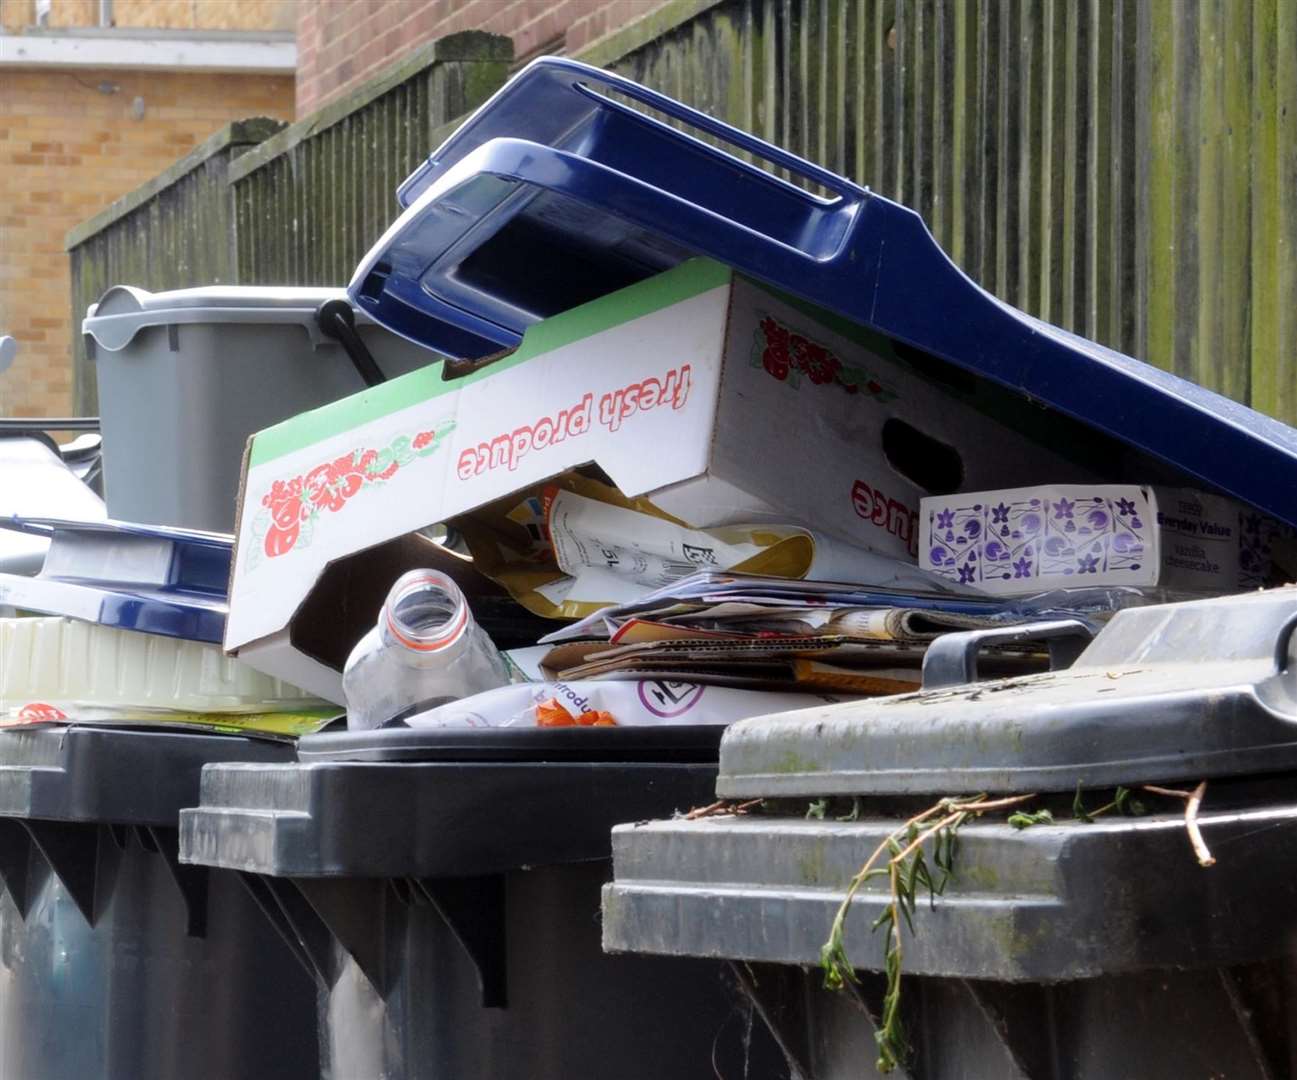 Recycling bins will continue to go uncollected while workers are on strike. Stock pic.